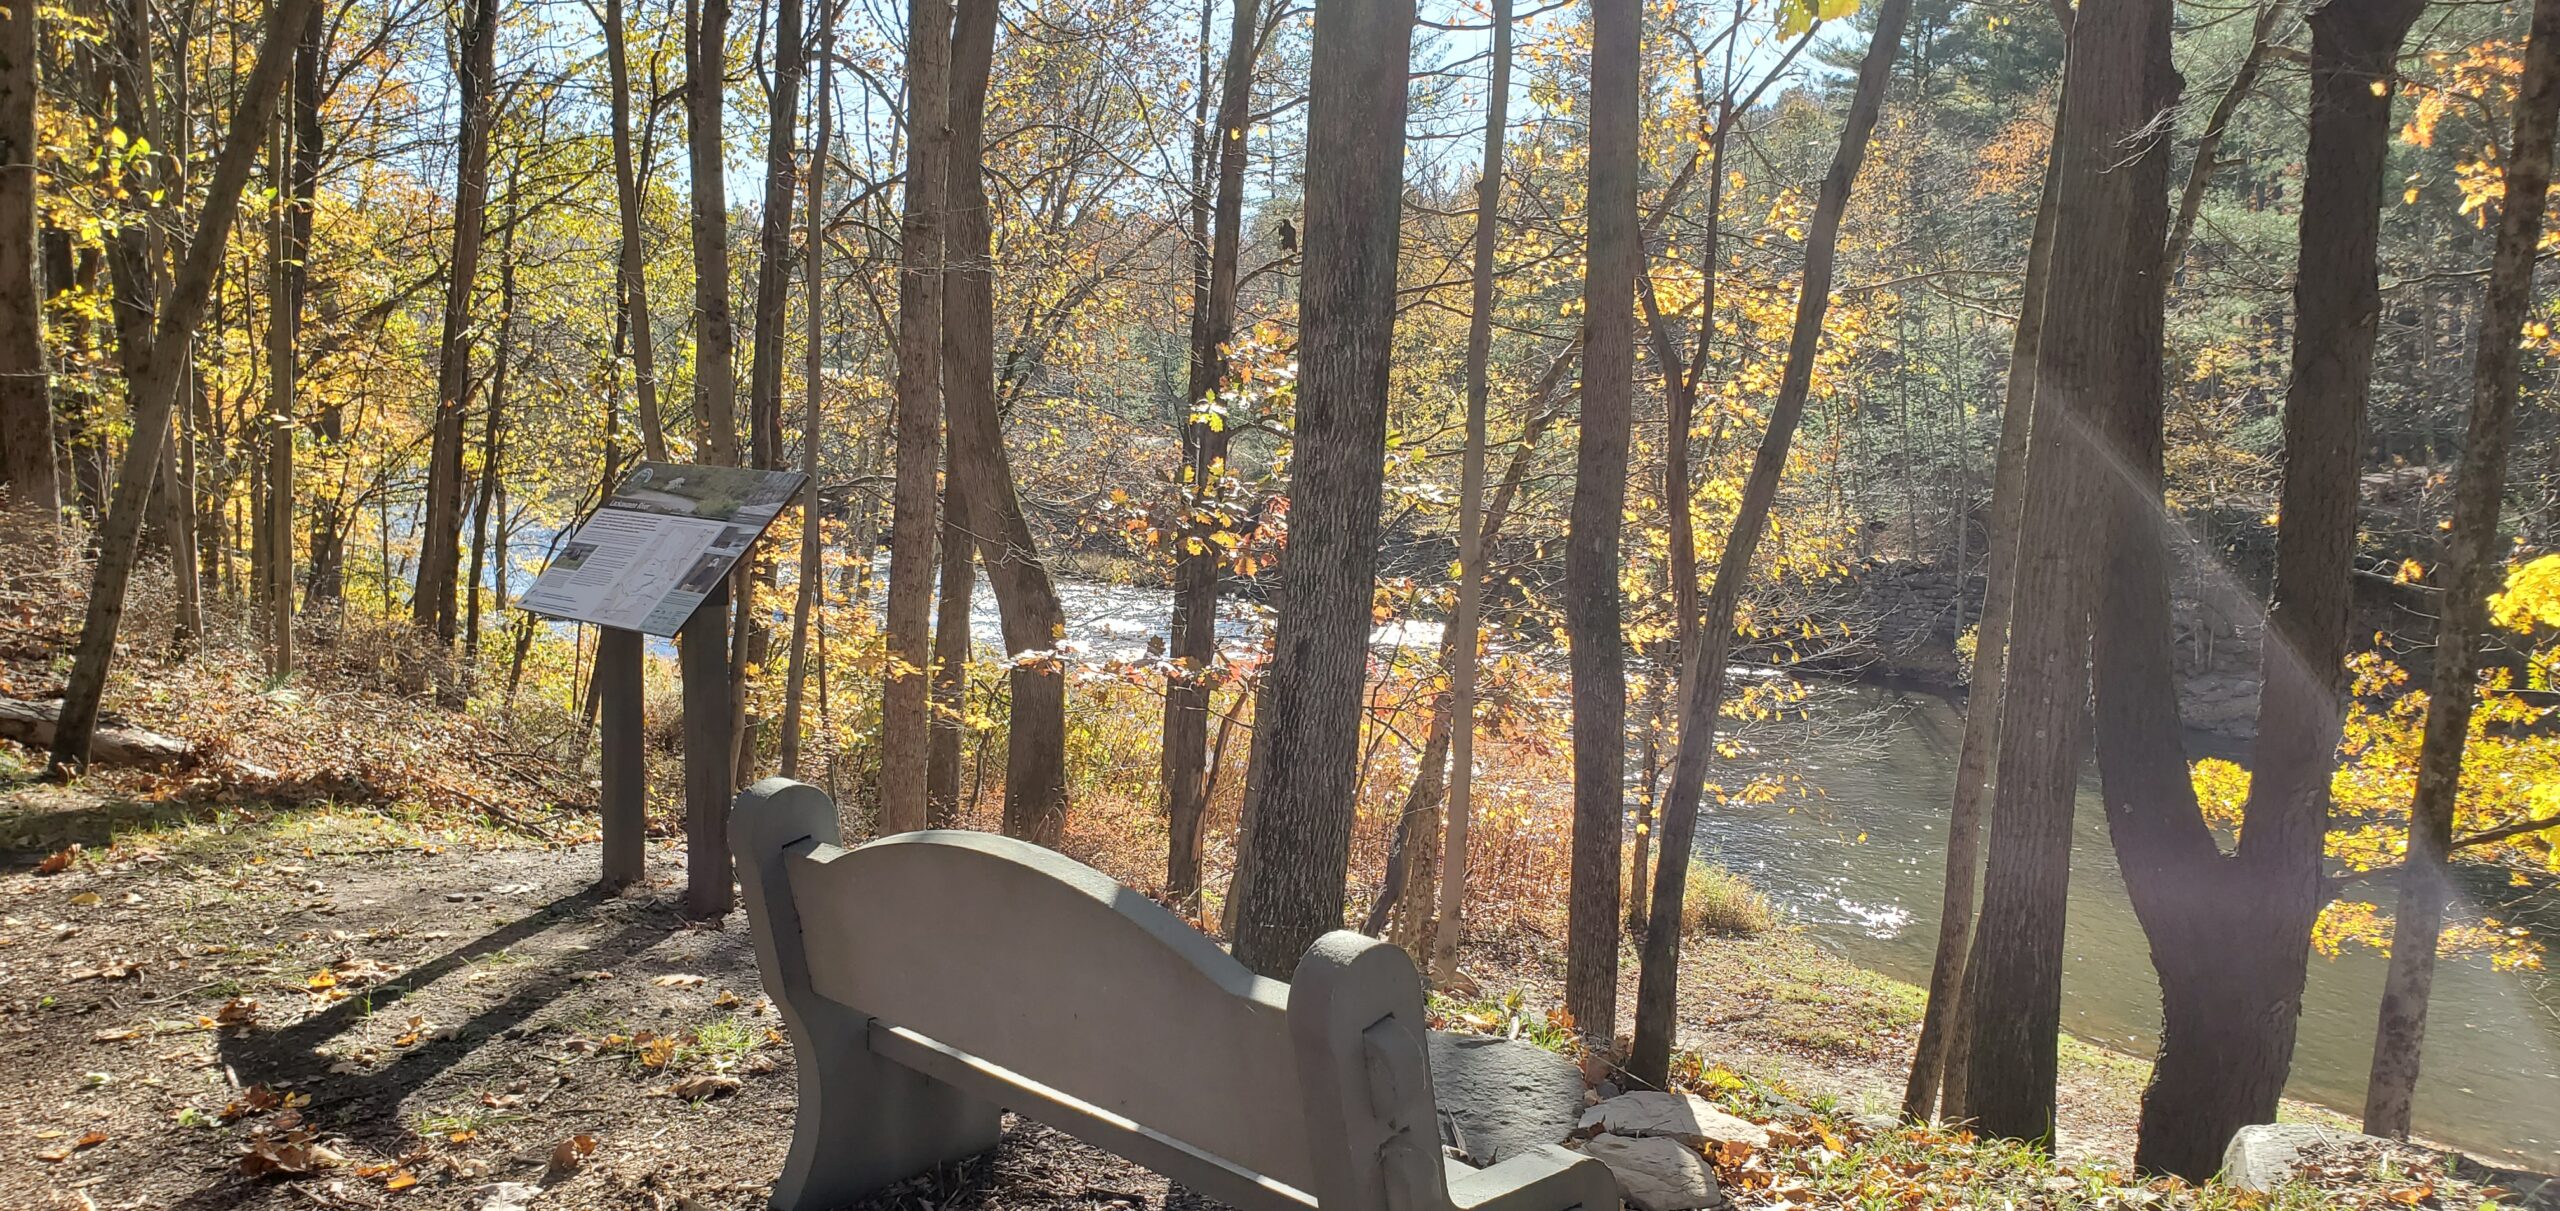 8 Things to Do While Remote Learning from the Poconos